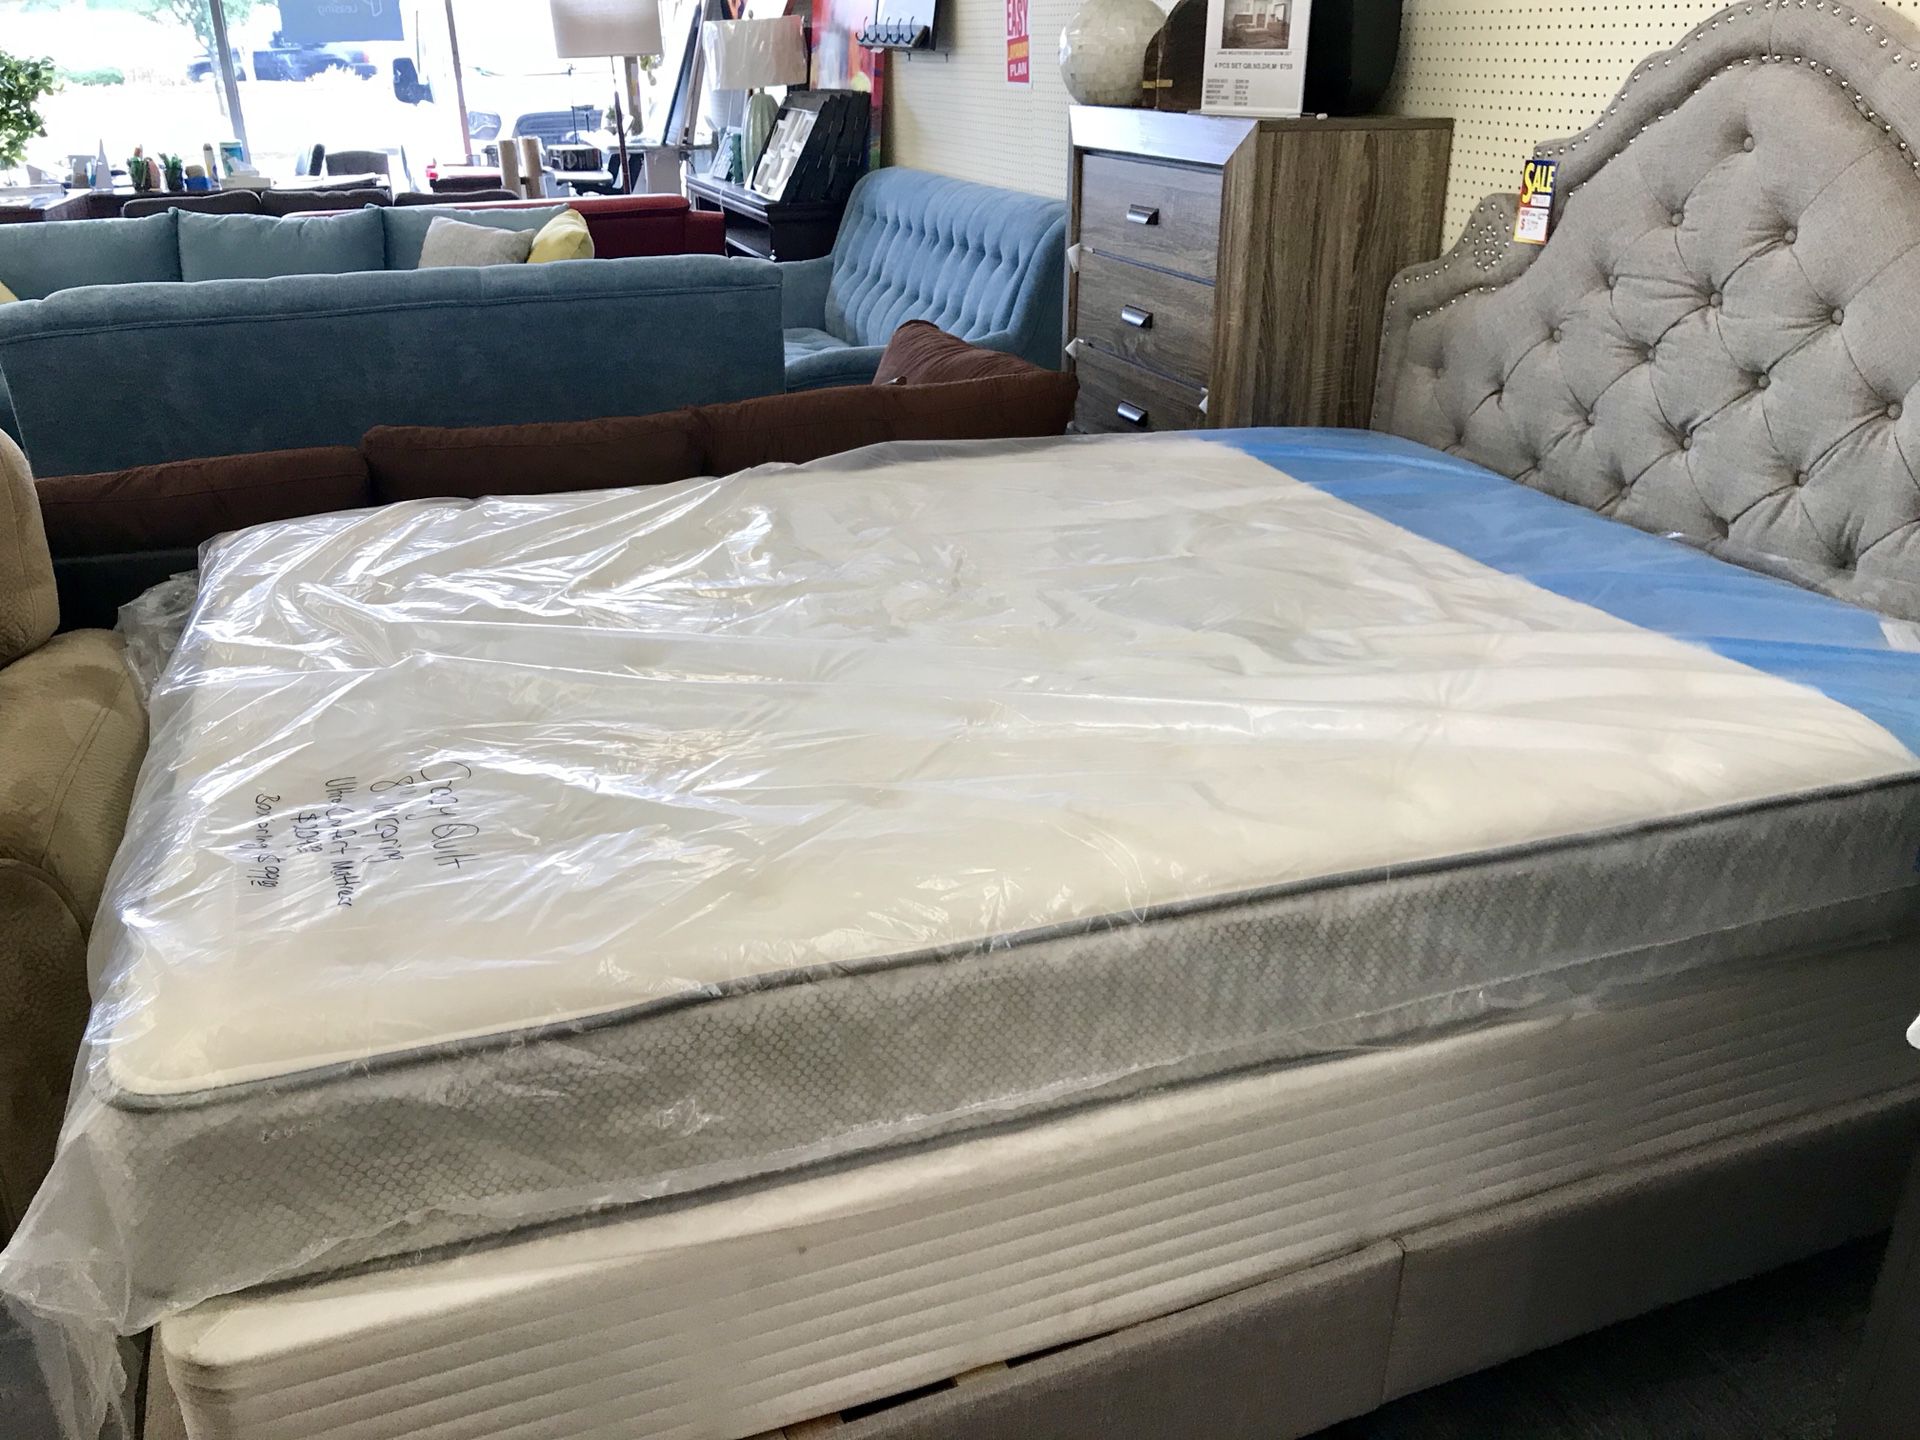 New 8” Inner Spring Ultra Comfort Queen Mattress for $209, Box Spring $99, Upholstered Bed $329